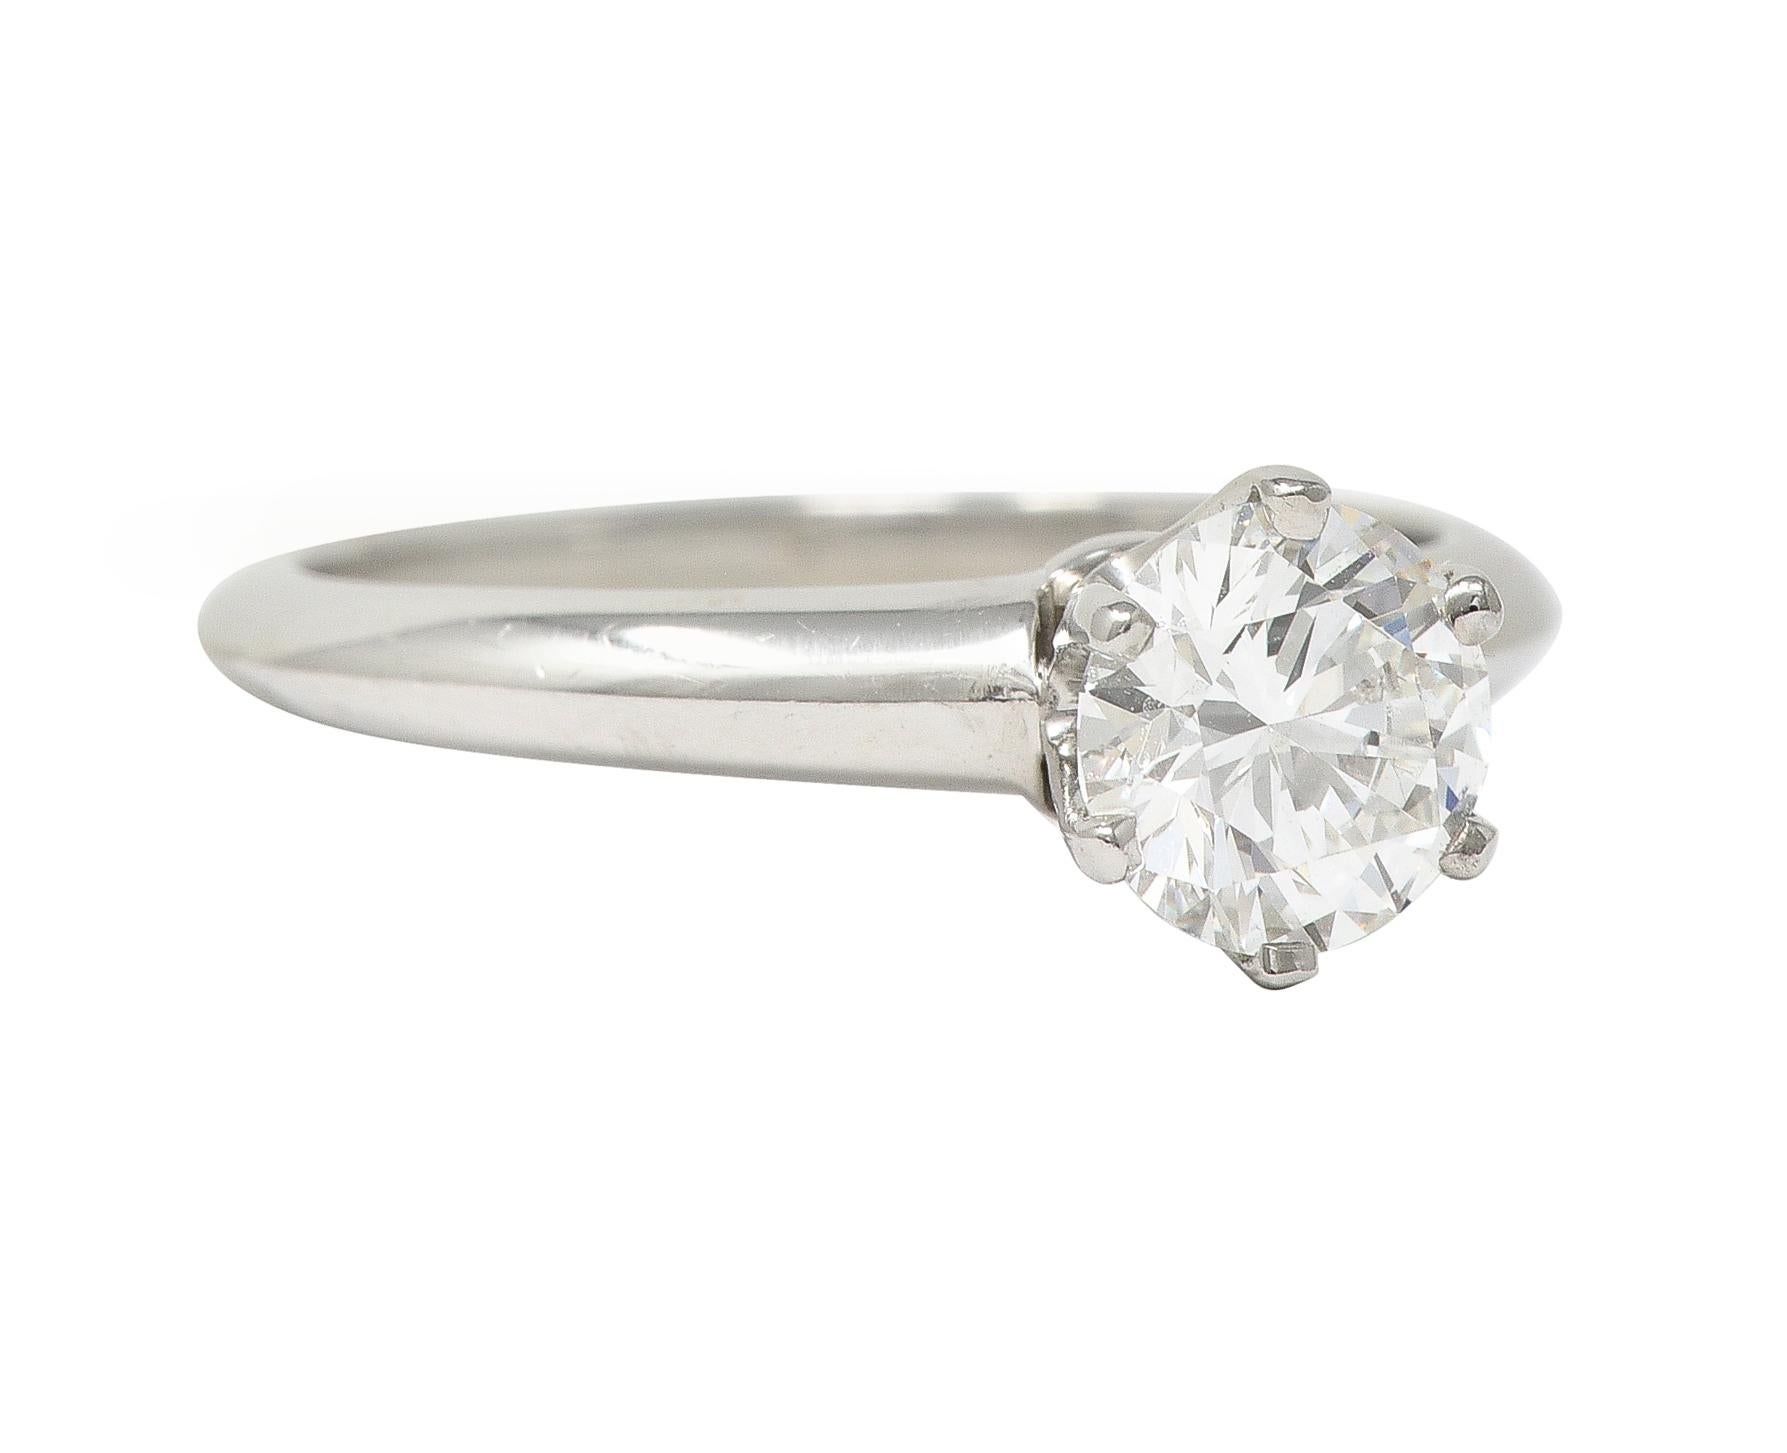 Centering a round brilliant cut diamond weighing 0.90 carat - H color with VS1 clarity
Prong set in a classic six-pronged Tiffany setting 
Completed by knife edge shank with high polish finish
Stamped for platinum
Inscribed with carat